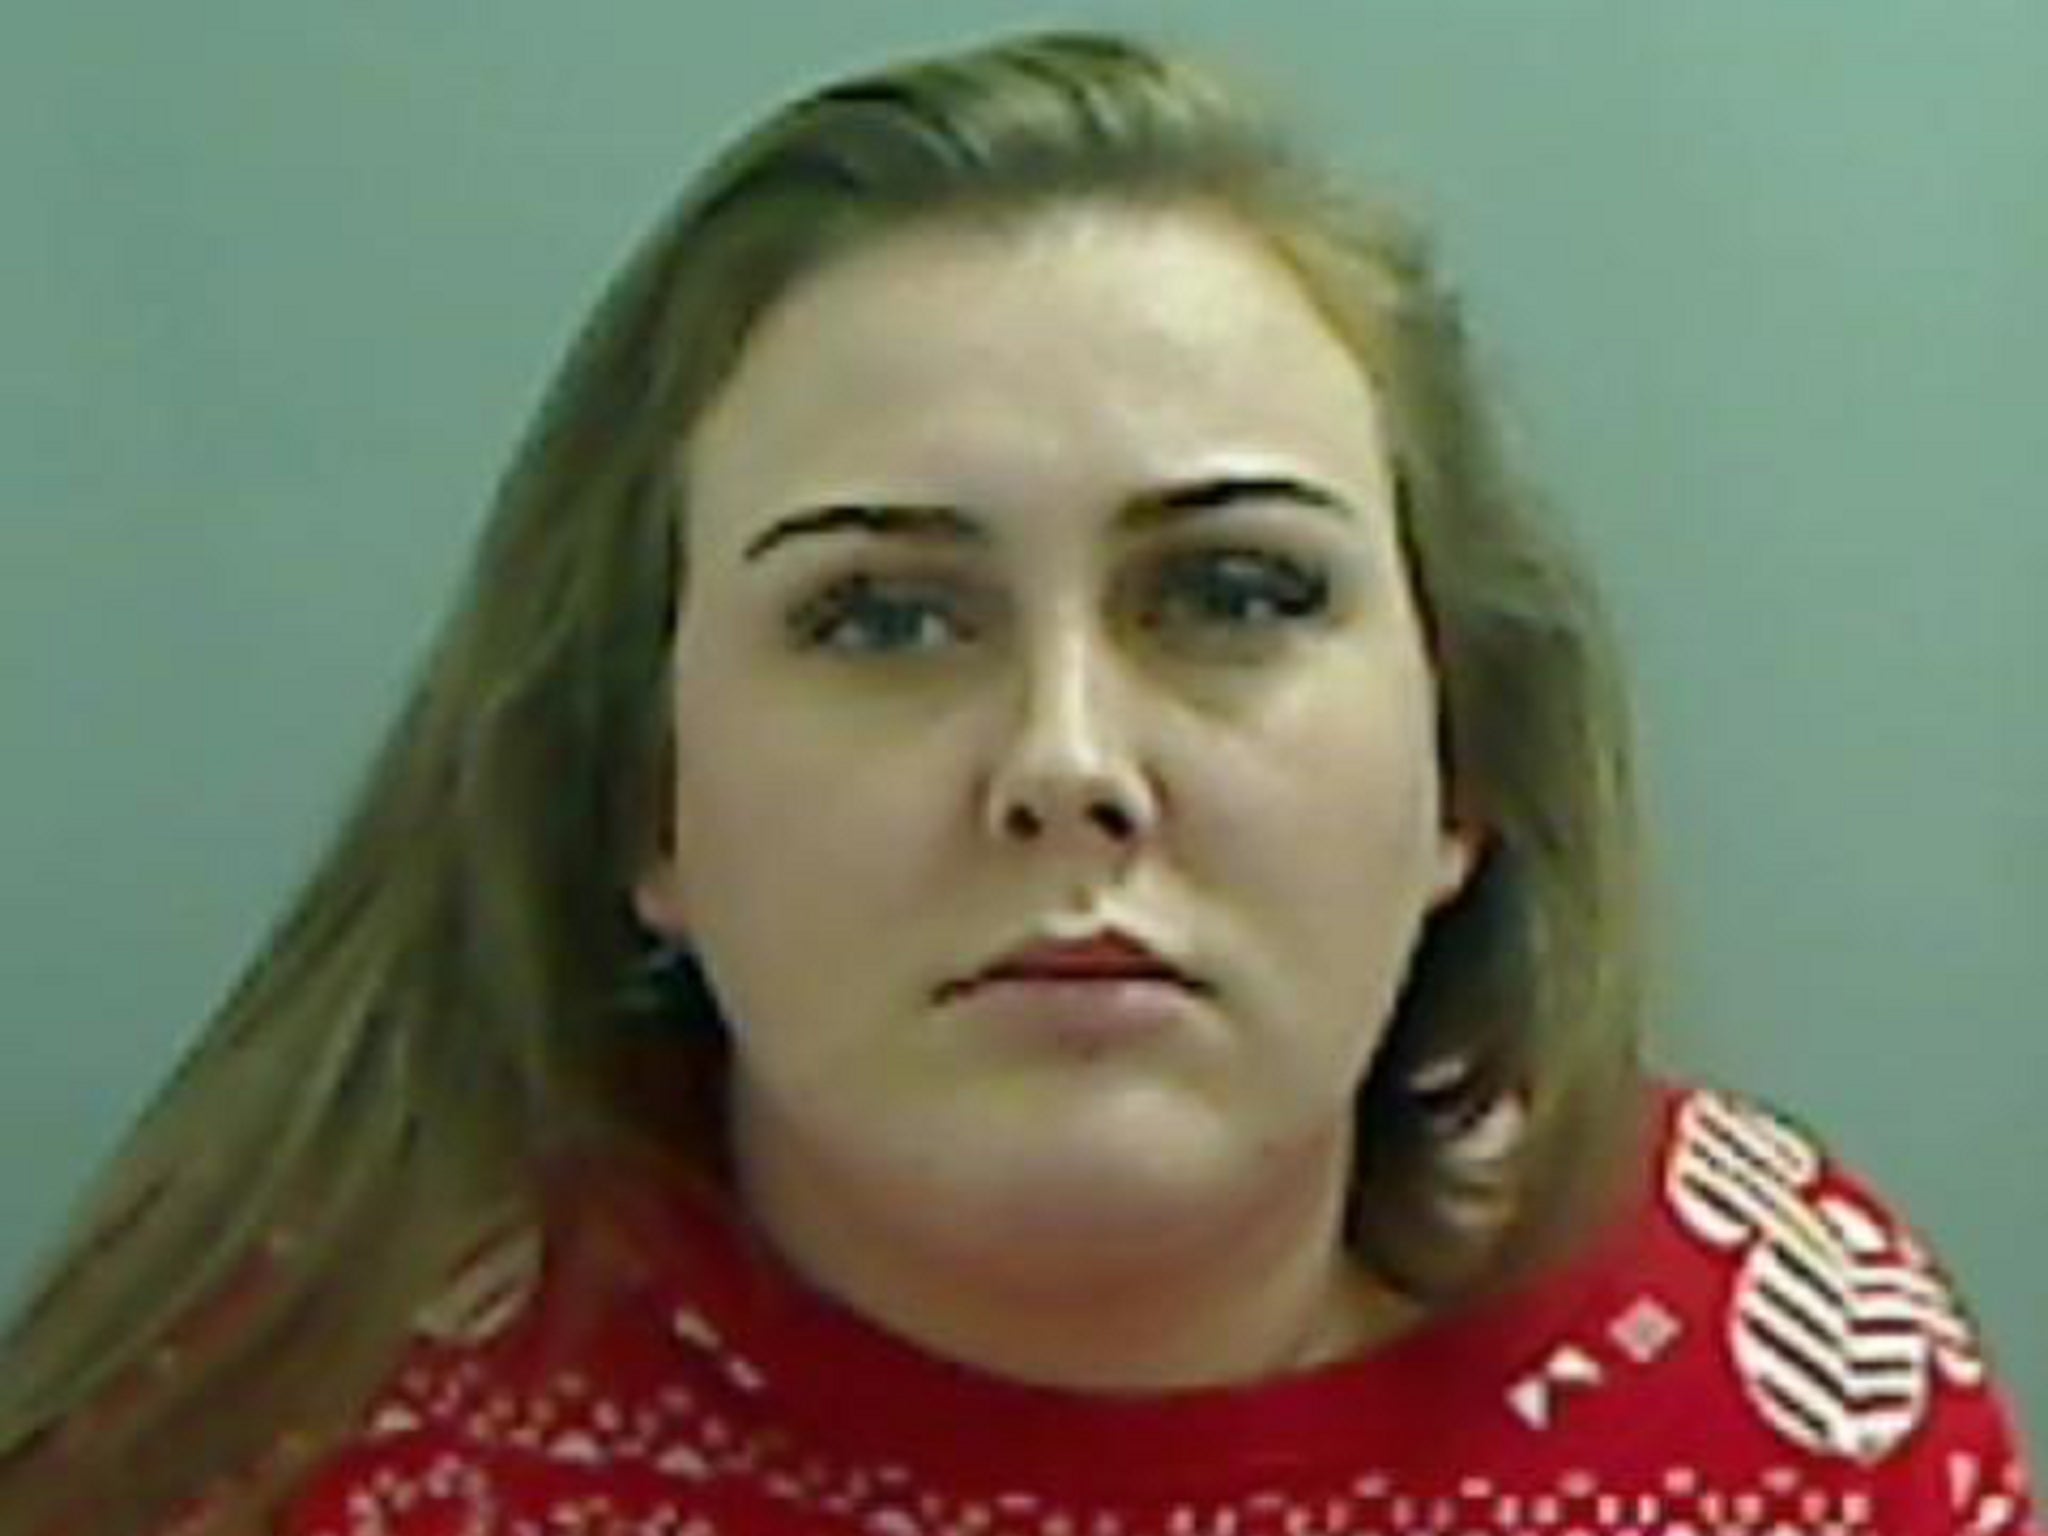 Paige Robinson, 24, was egged on by her boyfriend, who should share some culpability, a judge said